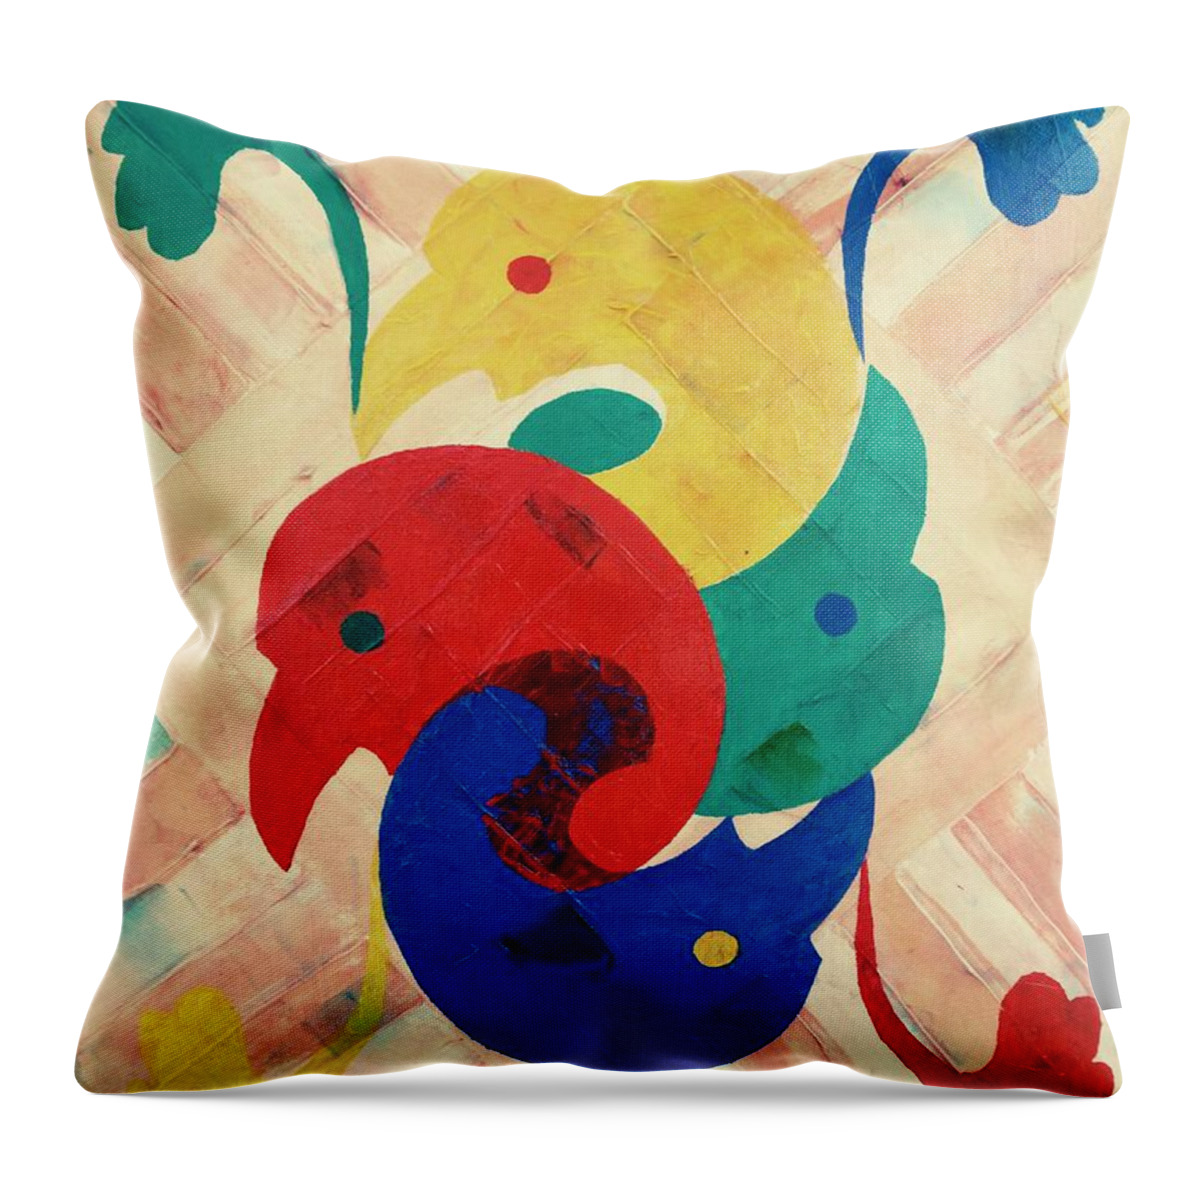  Throw Pillow featuring the painting Primary plus by Ray Khalife